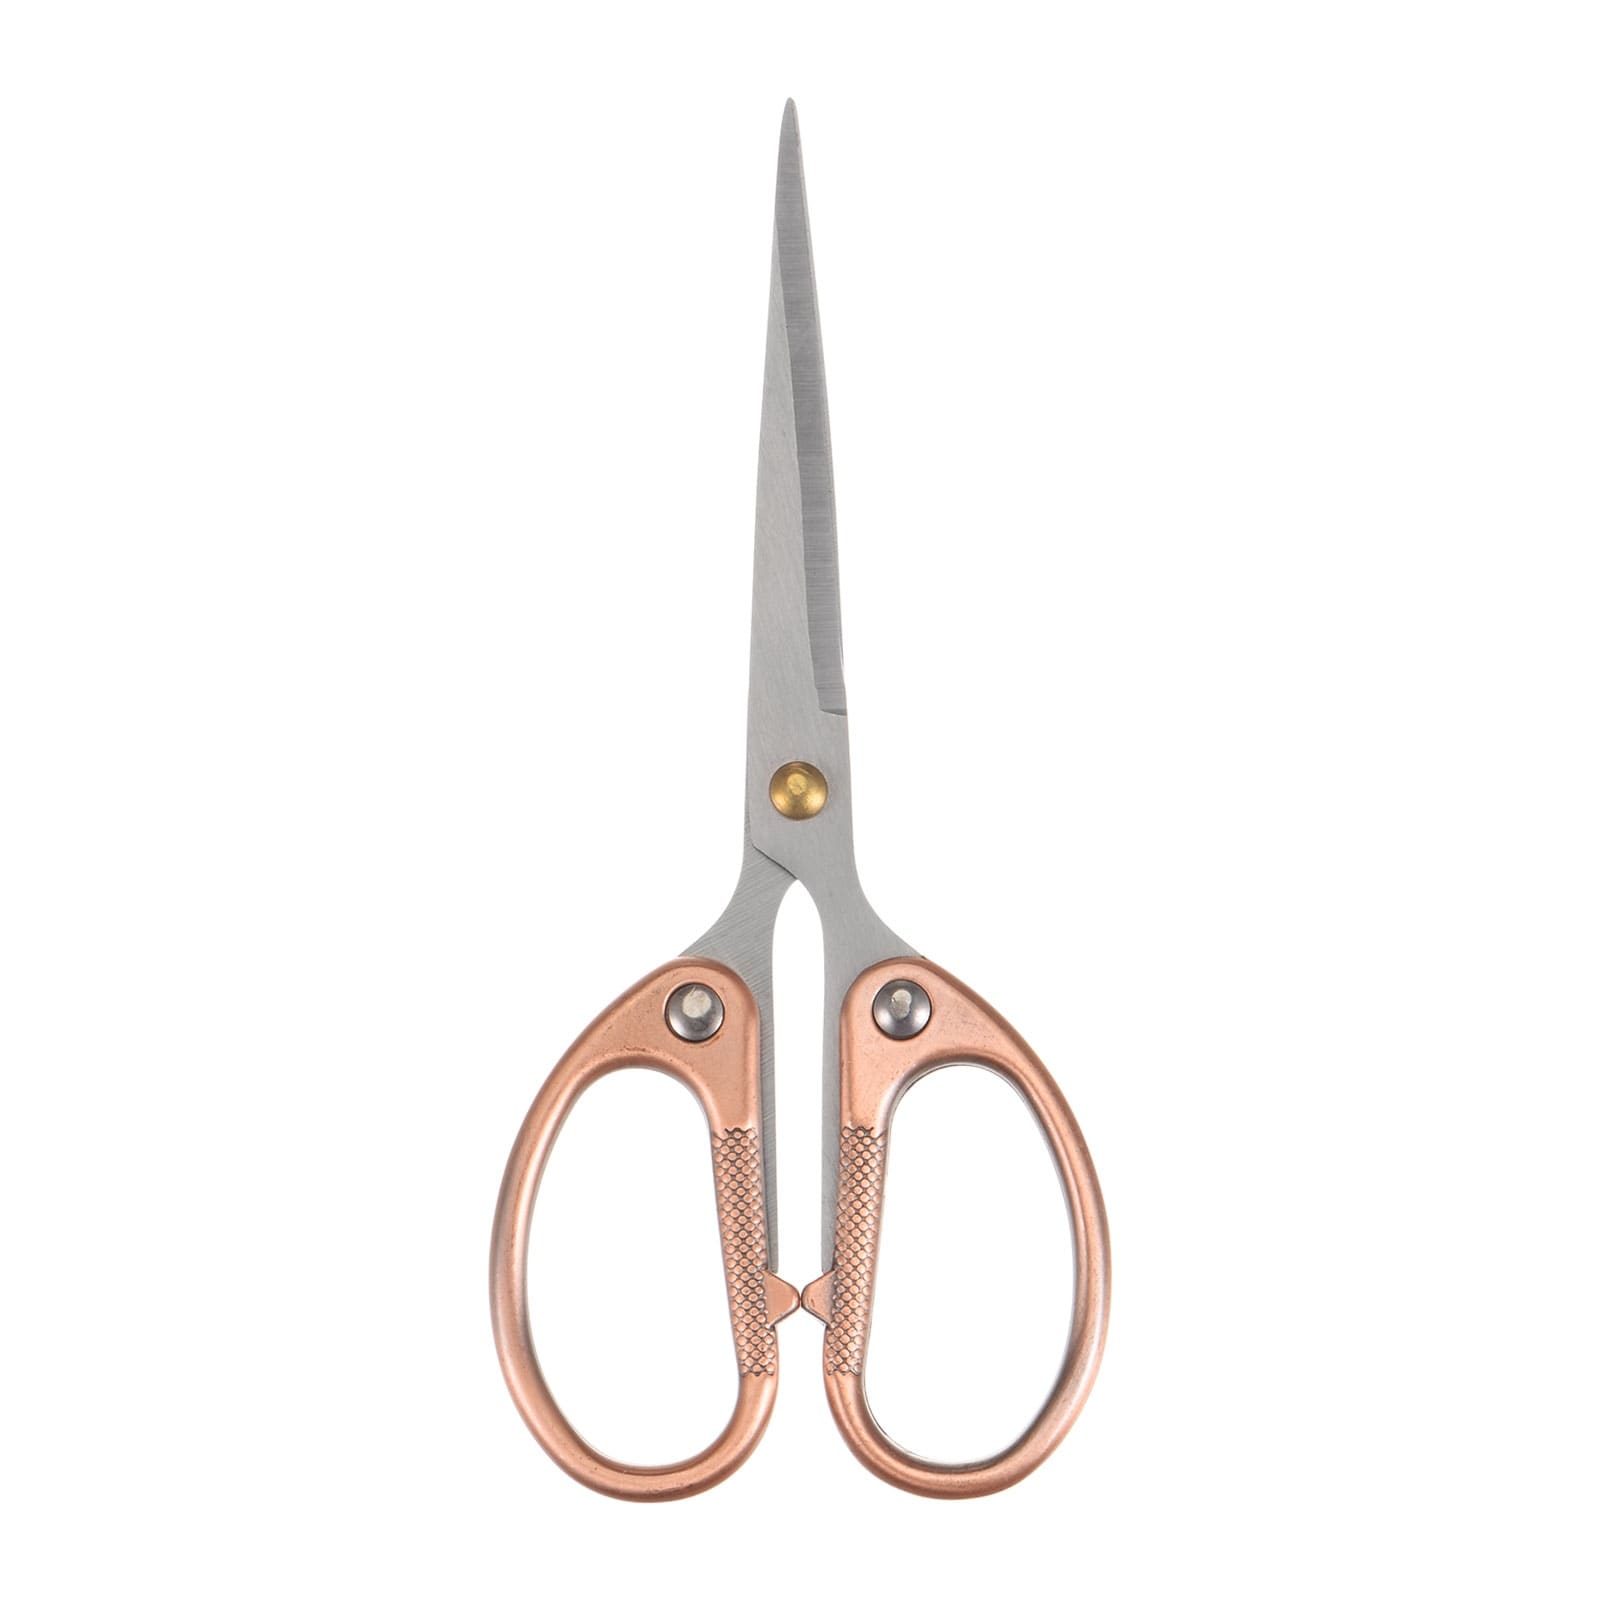 https://ak1.ostkcdn.com/images/products/is/images/direct/4719a8c4c3d7c94a12b73638e34548928831bd6b/5.3%22-Stainless-Steel-Vintage-Scissors-for-Embroidery-Sewing-Craft-Copper-Tone.jpg